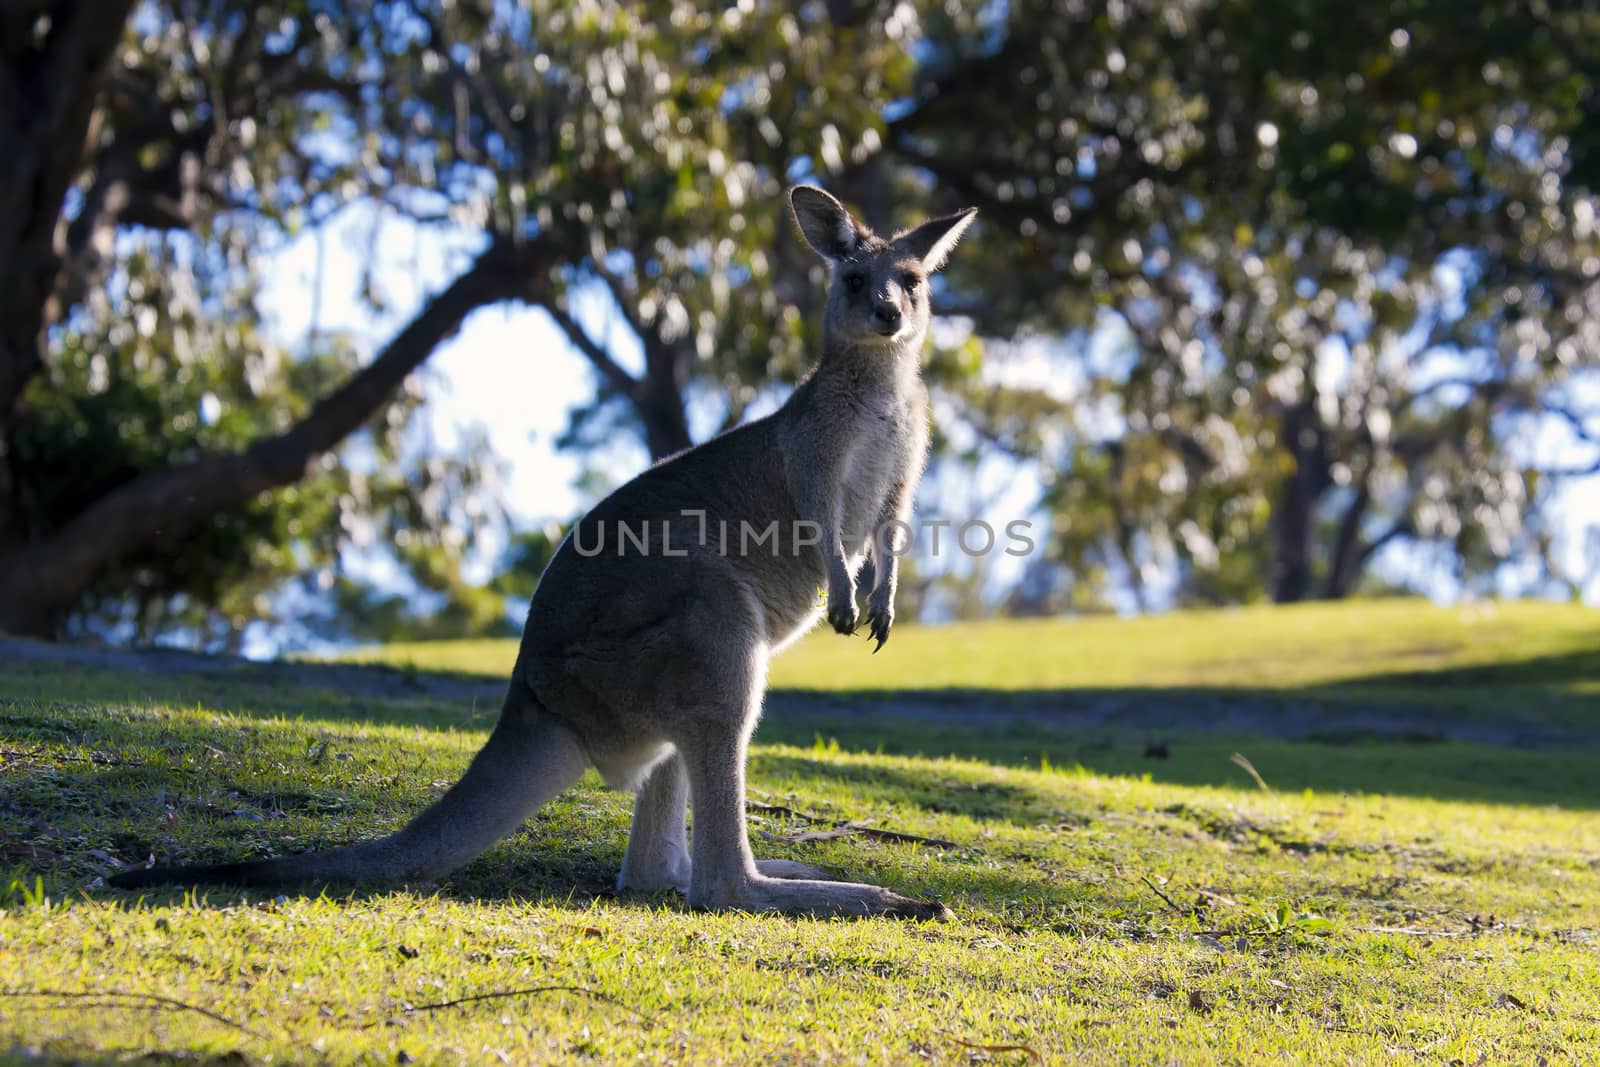 Closeup shot of a kangaroo standing on green grass with a blurred background